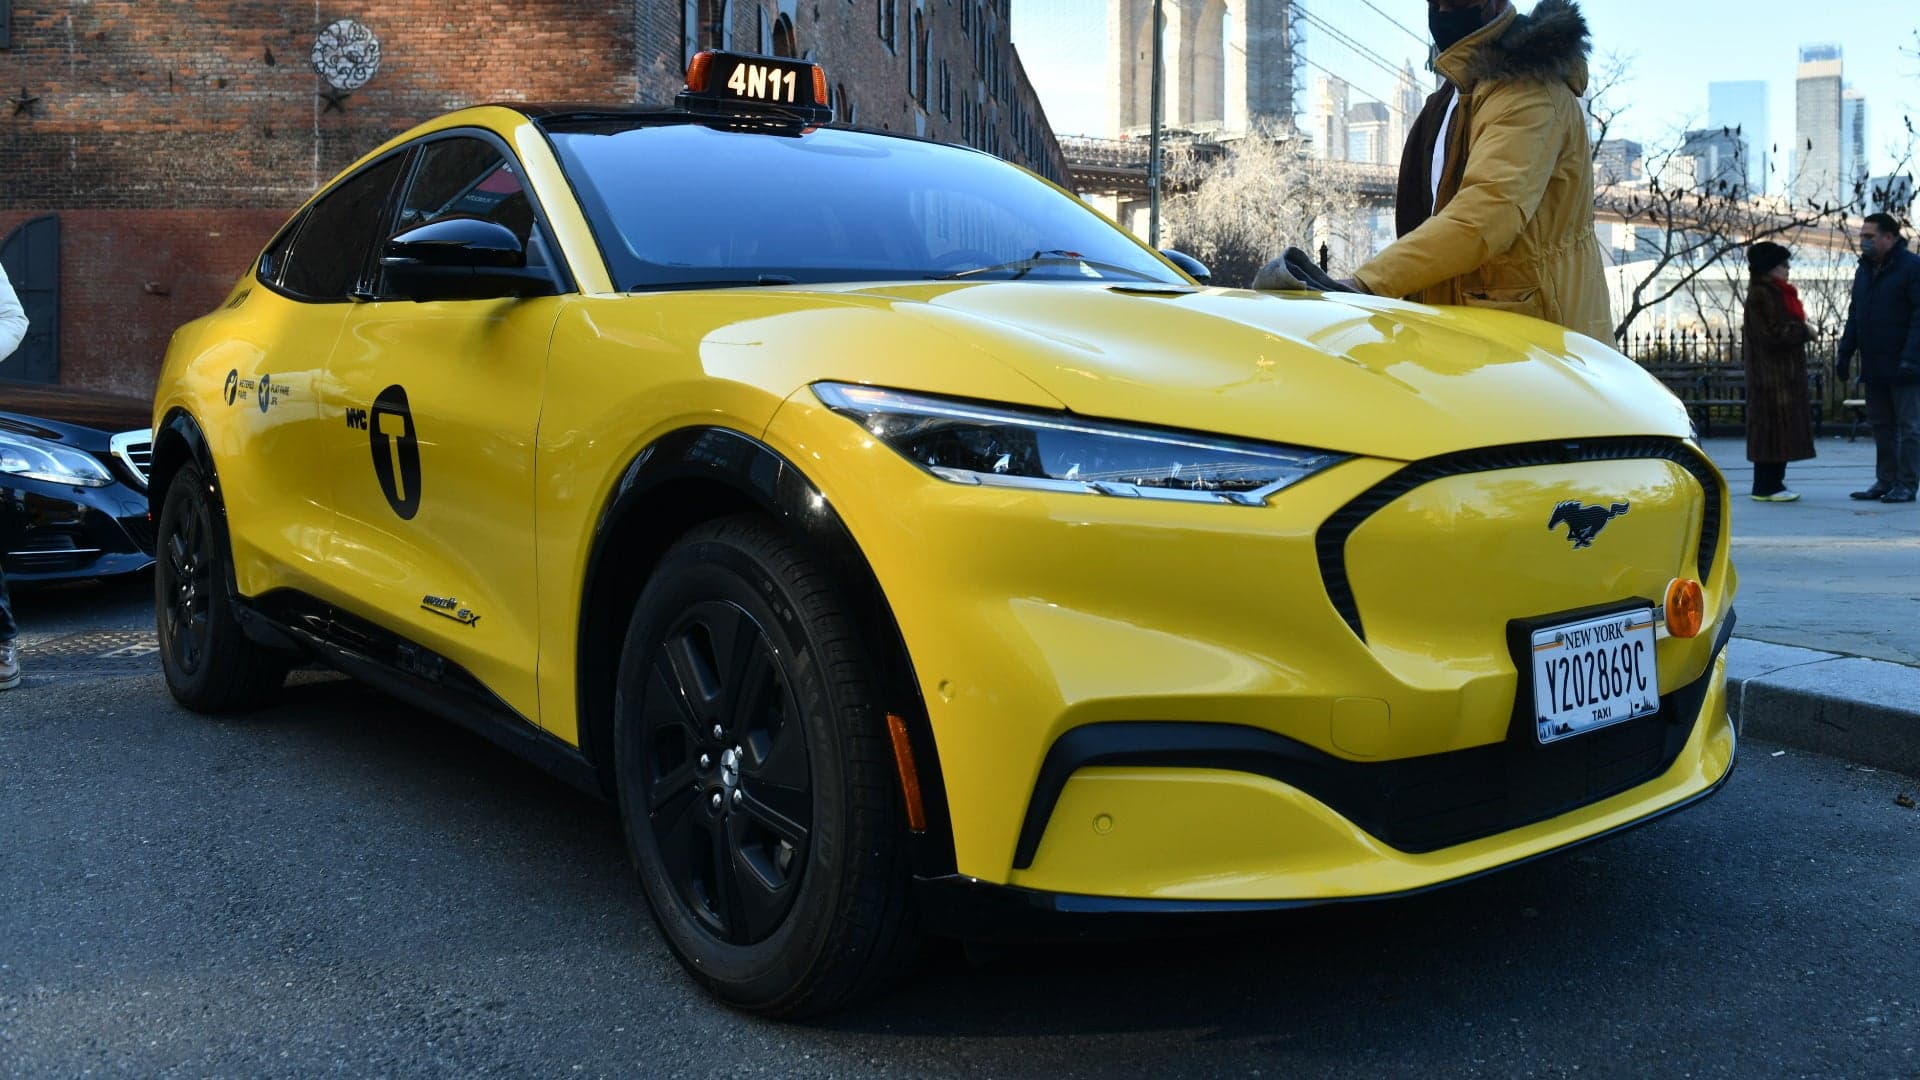 The Ford Mustang Mach-E Is Now an NYC Taxi. Let’s See How It Fares